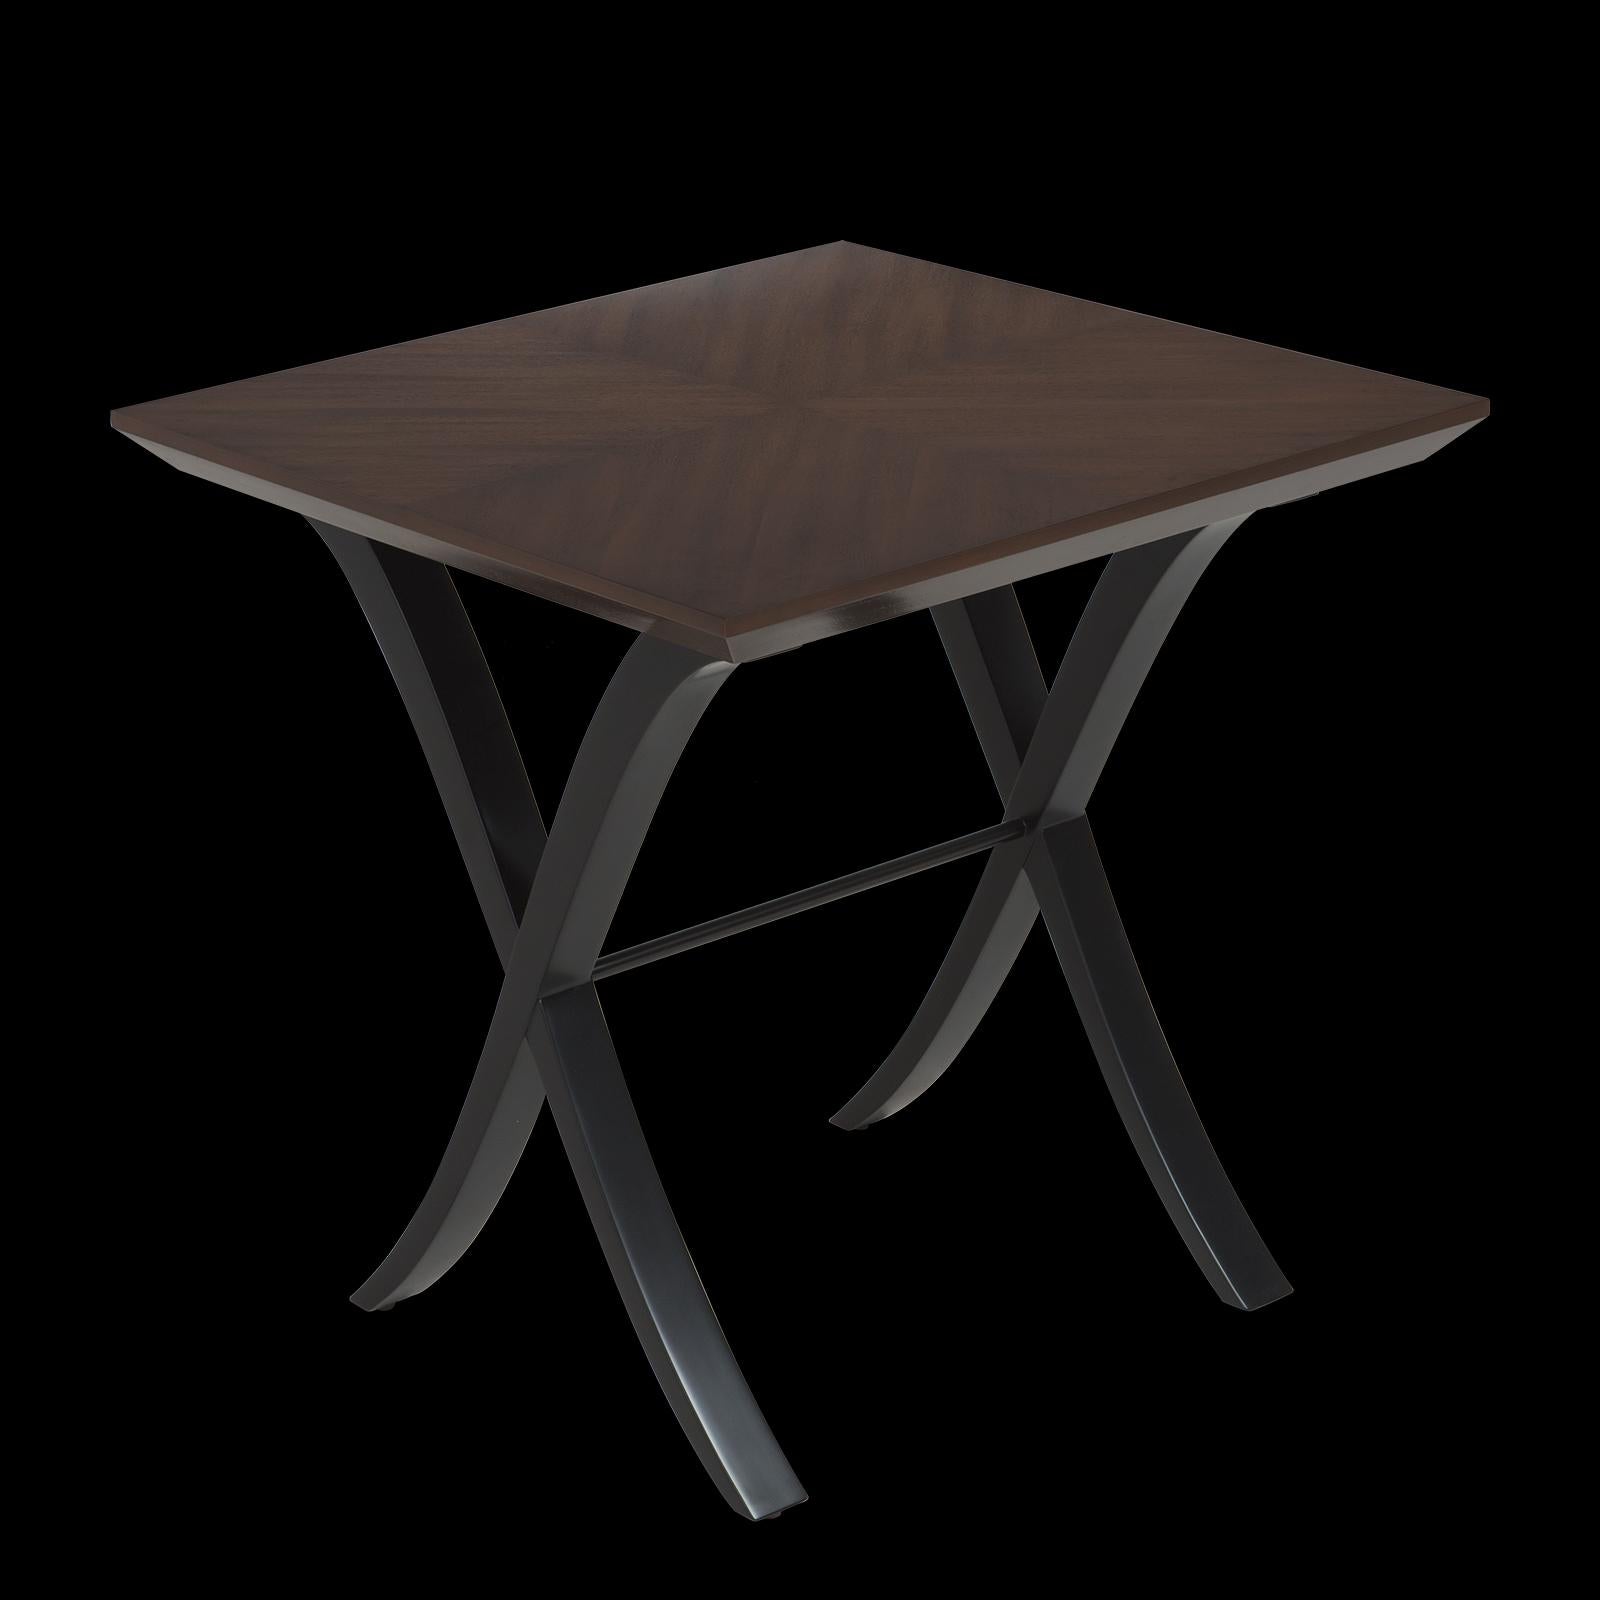 Side table double X with veneered mahogany
top and with twin cross feet in forged iron in black
satin finish.